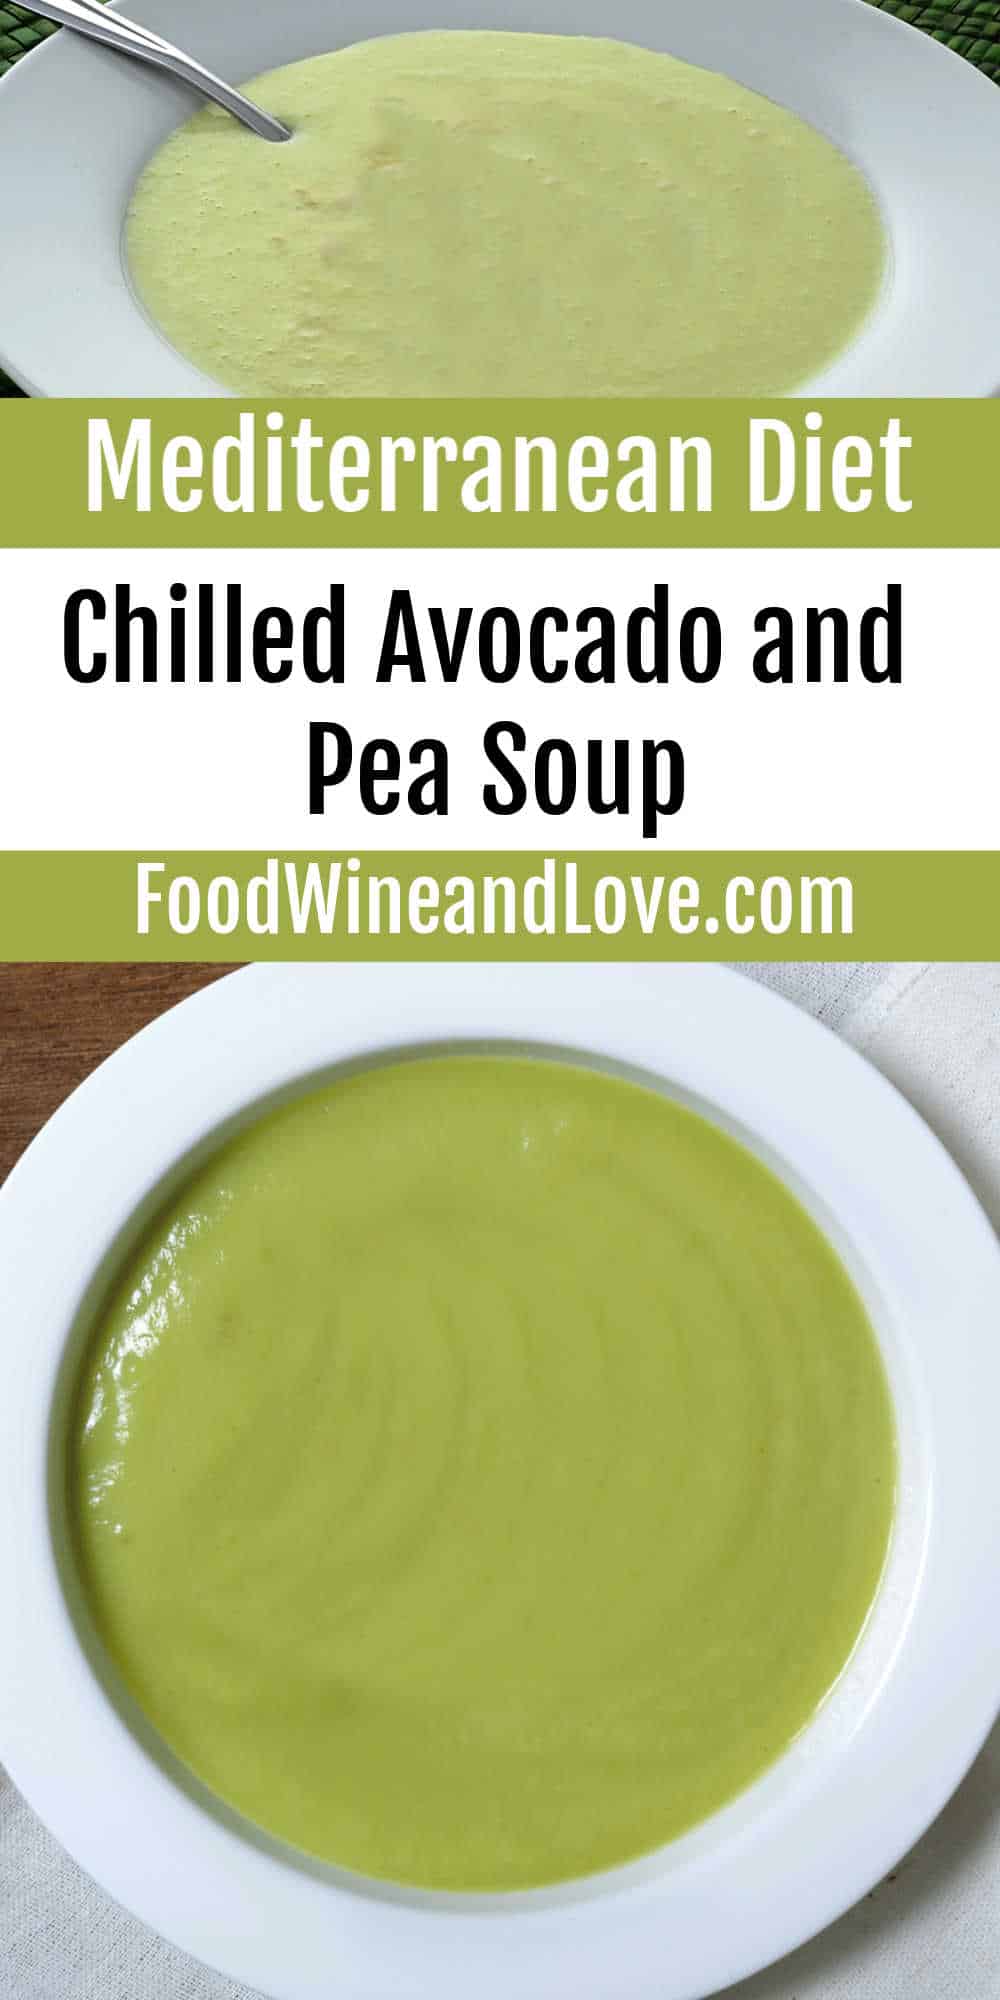 Chilled Avocado and Pea Soup